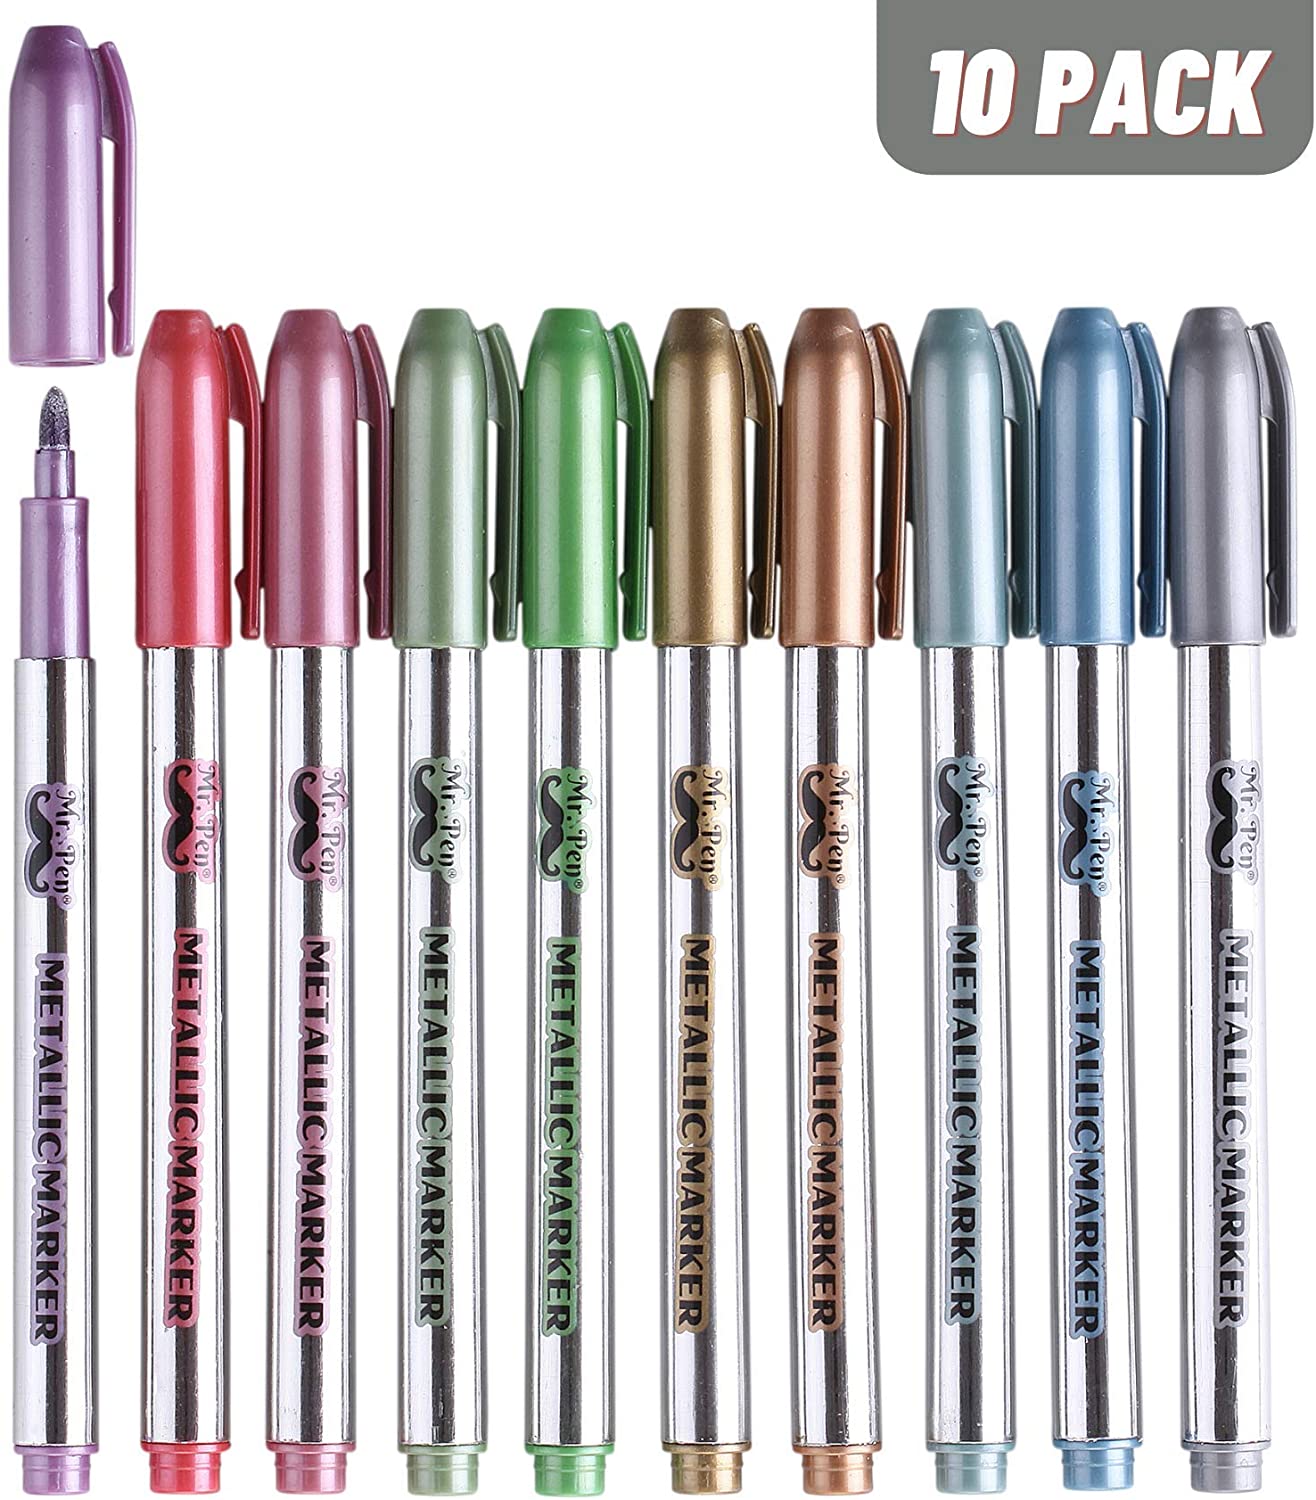 Mr. Pen- Metallic Paint Markers, 6 Pack, Silver and Gold, Silver Paint  Marker, Gold Ink Pen, Silver Pen, Silver Markers Permanent Metallic, Silver  Ink Pen, Gold Metallic Marker, Gold Marker, Gold Pen